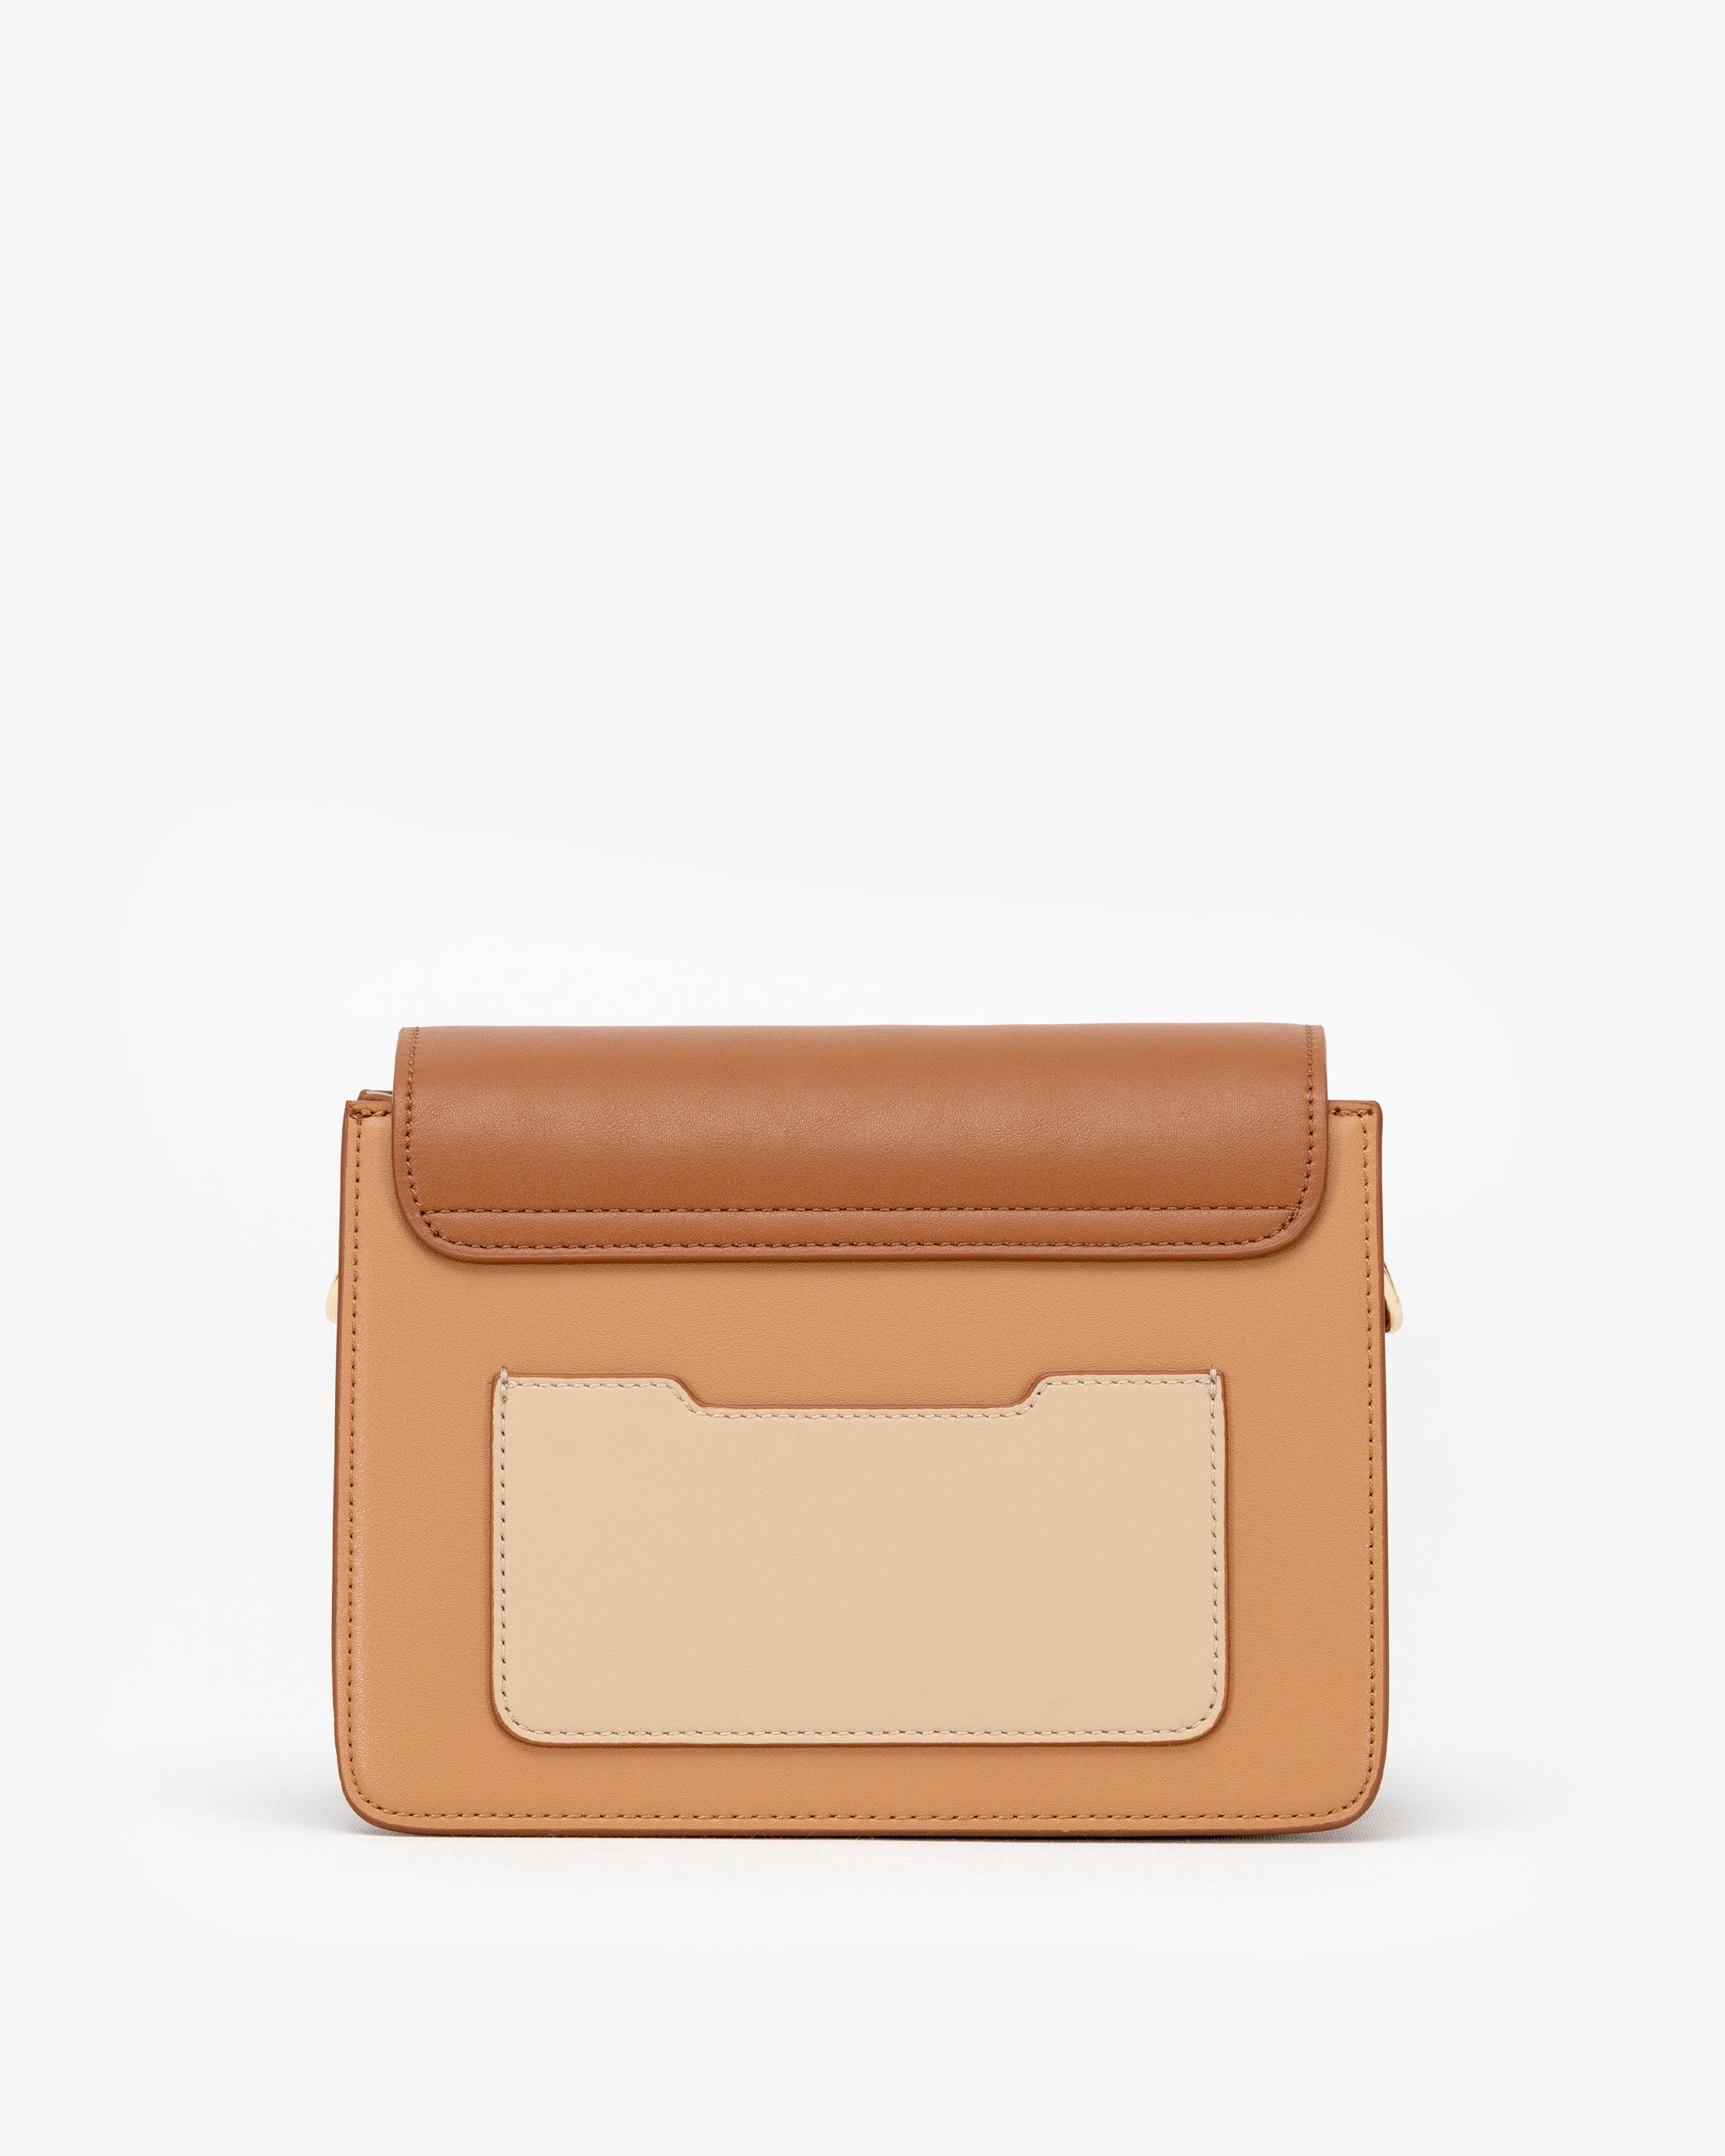 Pre-order (Mid-May): Shoulder Bag in Neutral Multi with Personalised Hardware